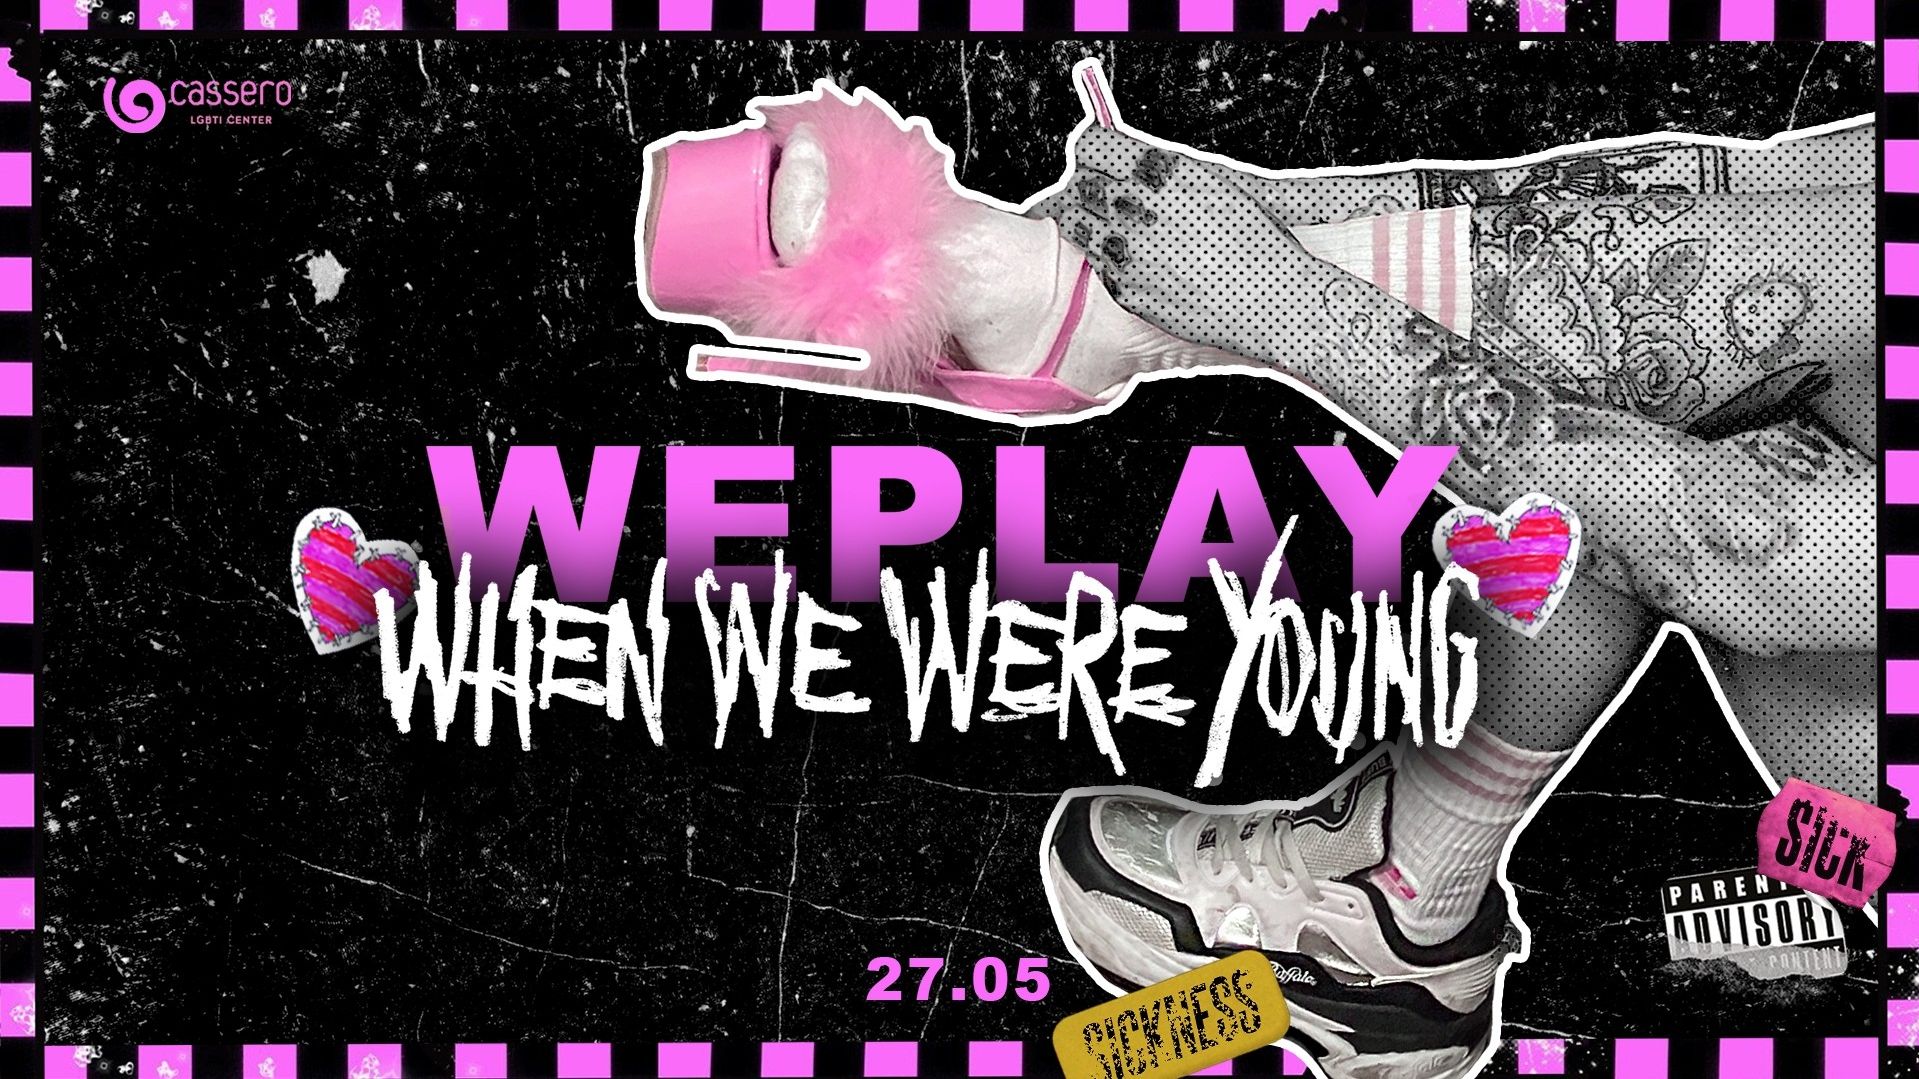 weplay - when we were young